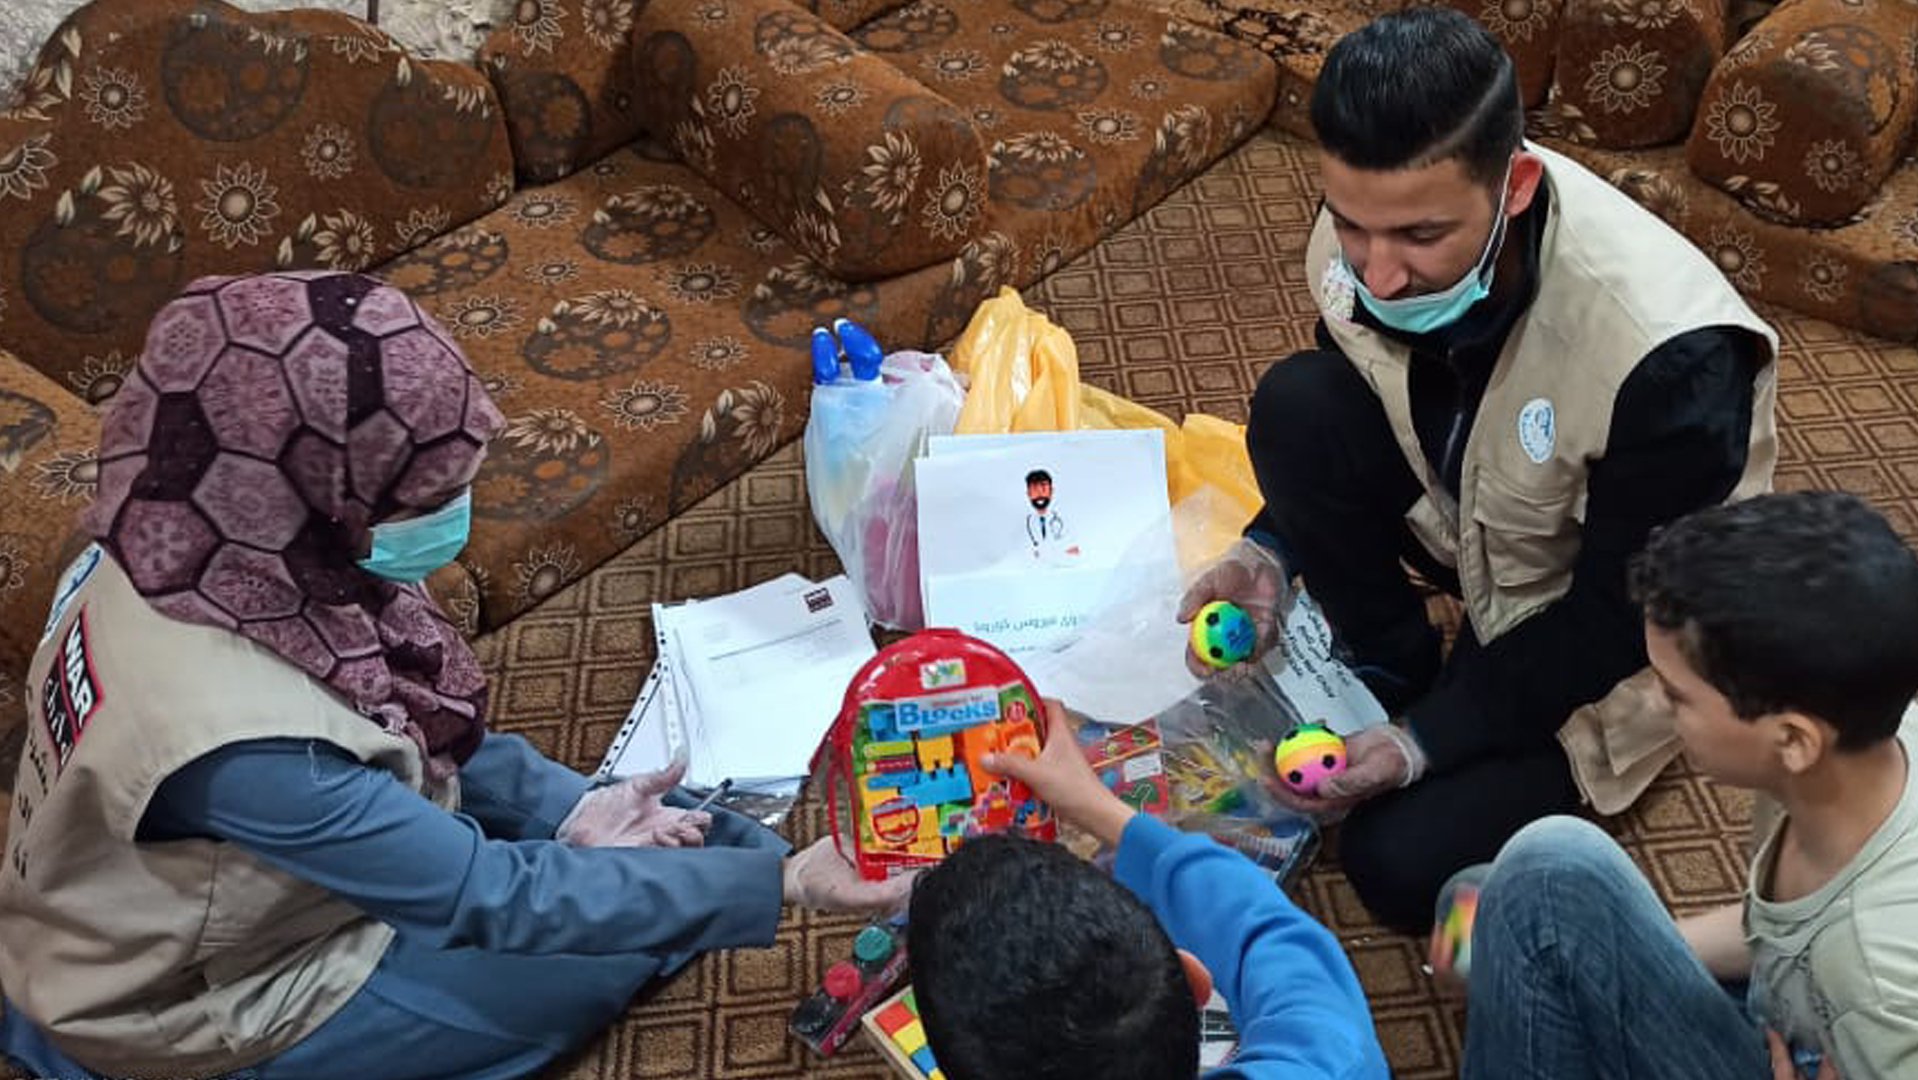 Covid-19 emergency kits to protect families in Gaza, occupied palestinian territory - War Child